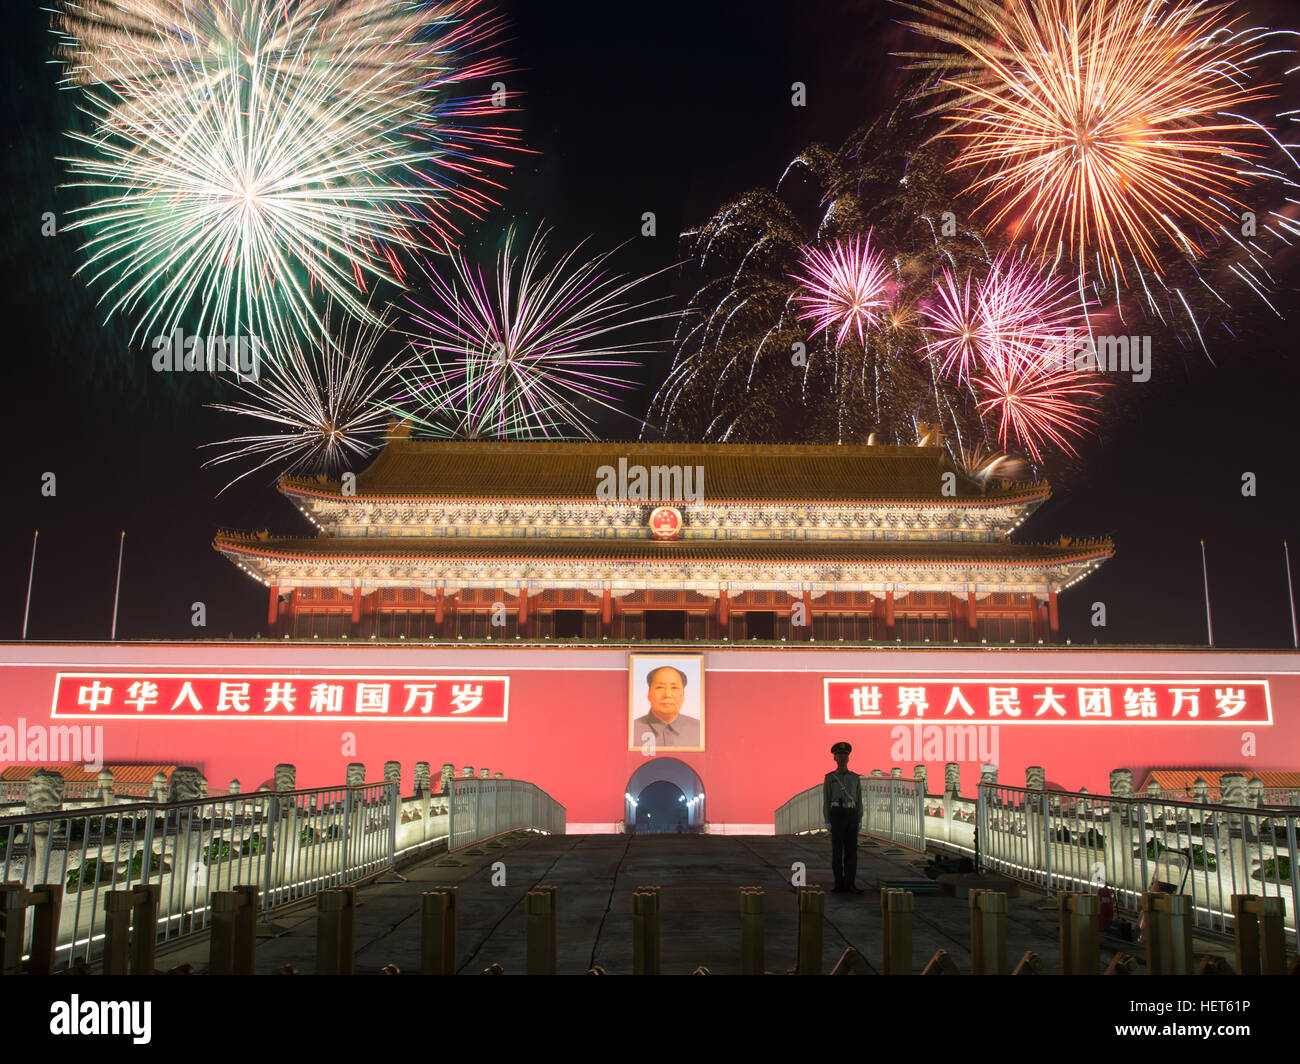 BEIJING - SEPTEMBER 26: Fireworks over The Gate of Heavenly Peace at famous Tiananmen square in Chinese capital city Stock Photo